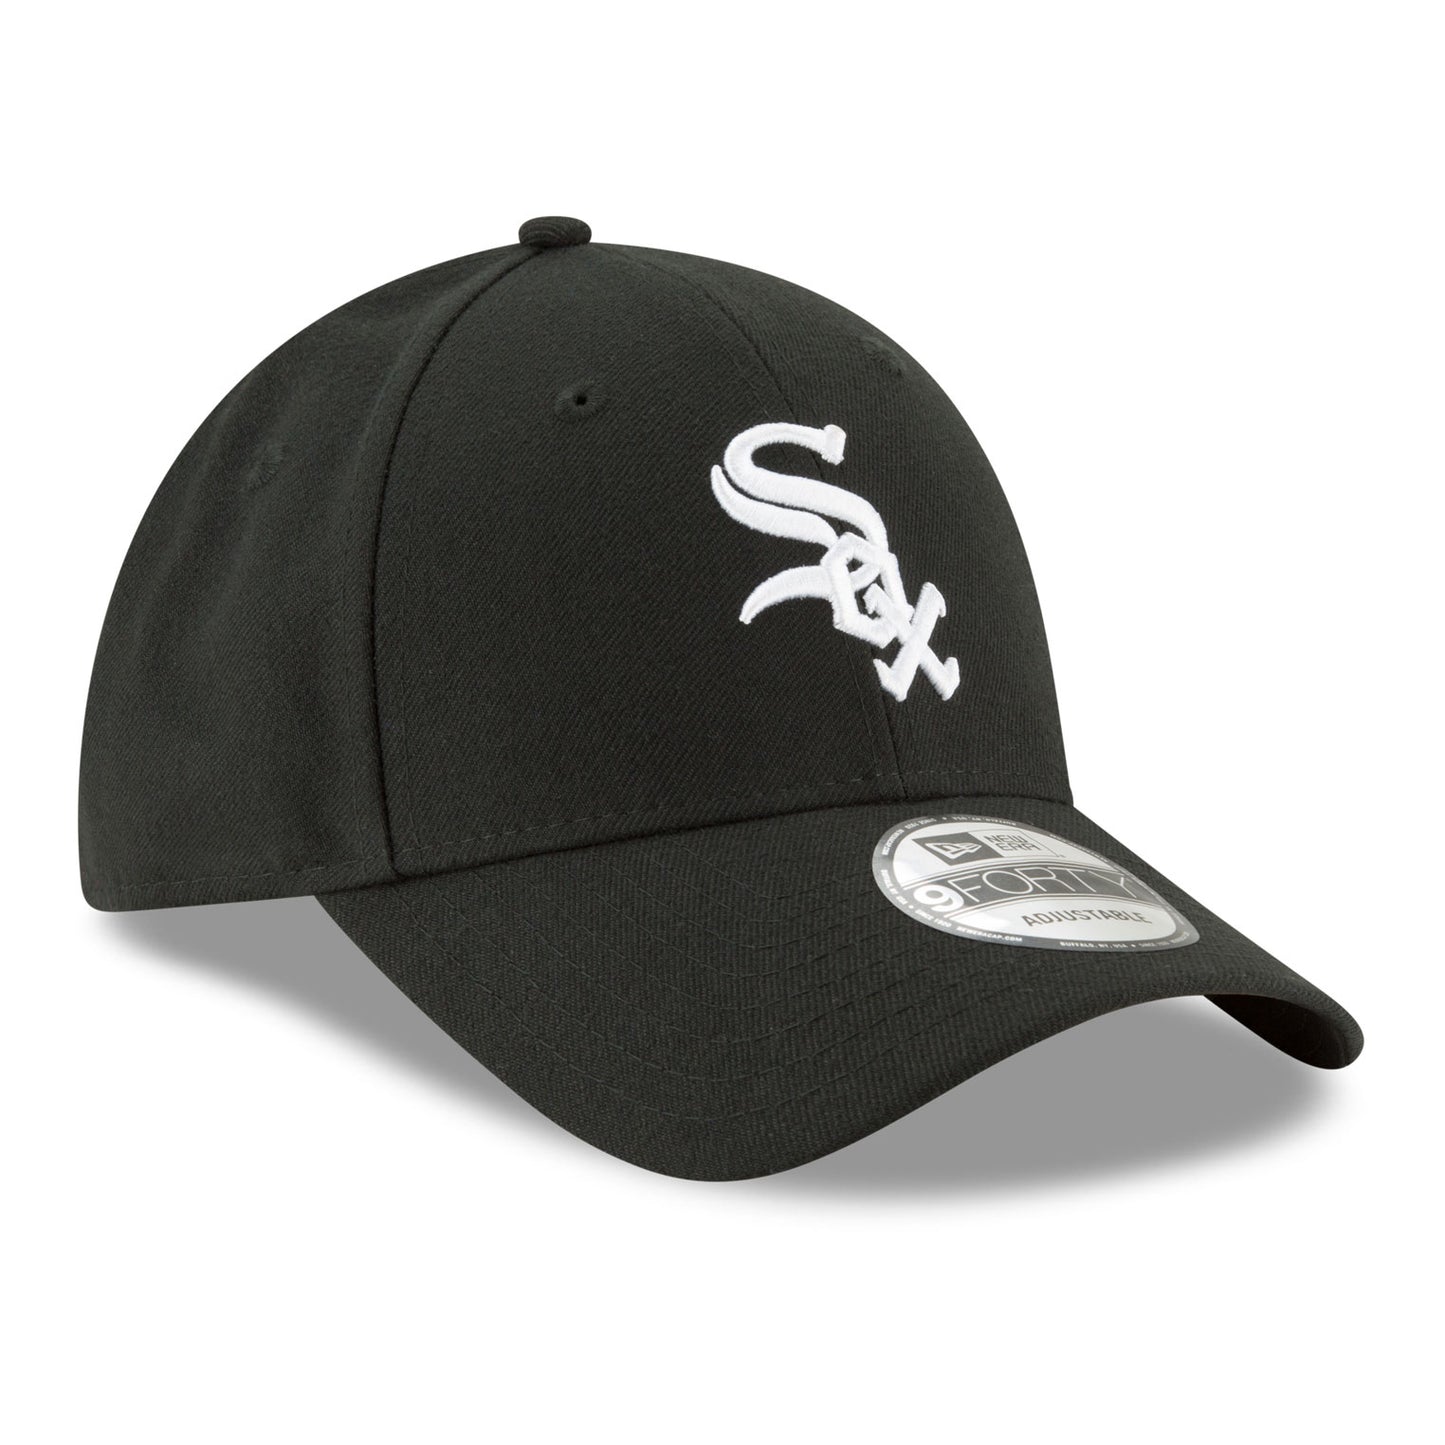 THE LEAGUE Chicago White Sox 9FORTY New Era Cap